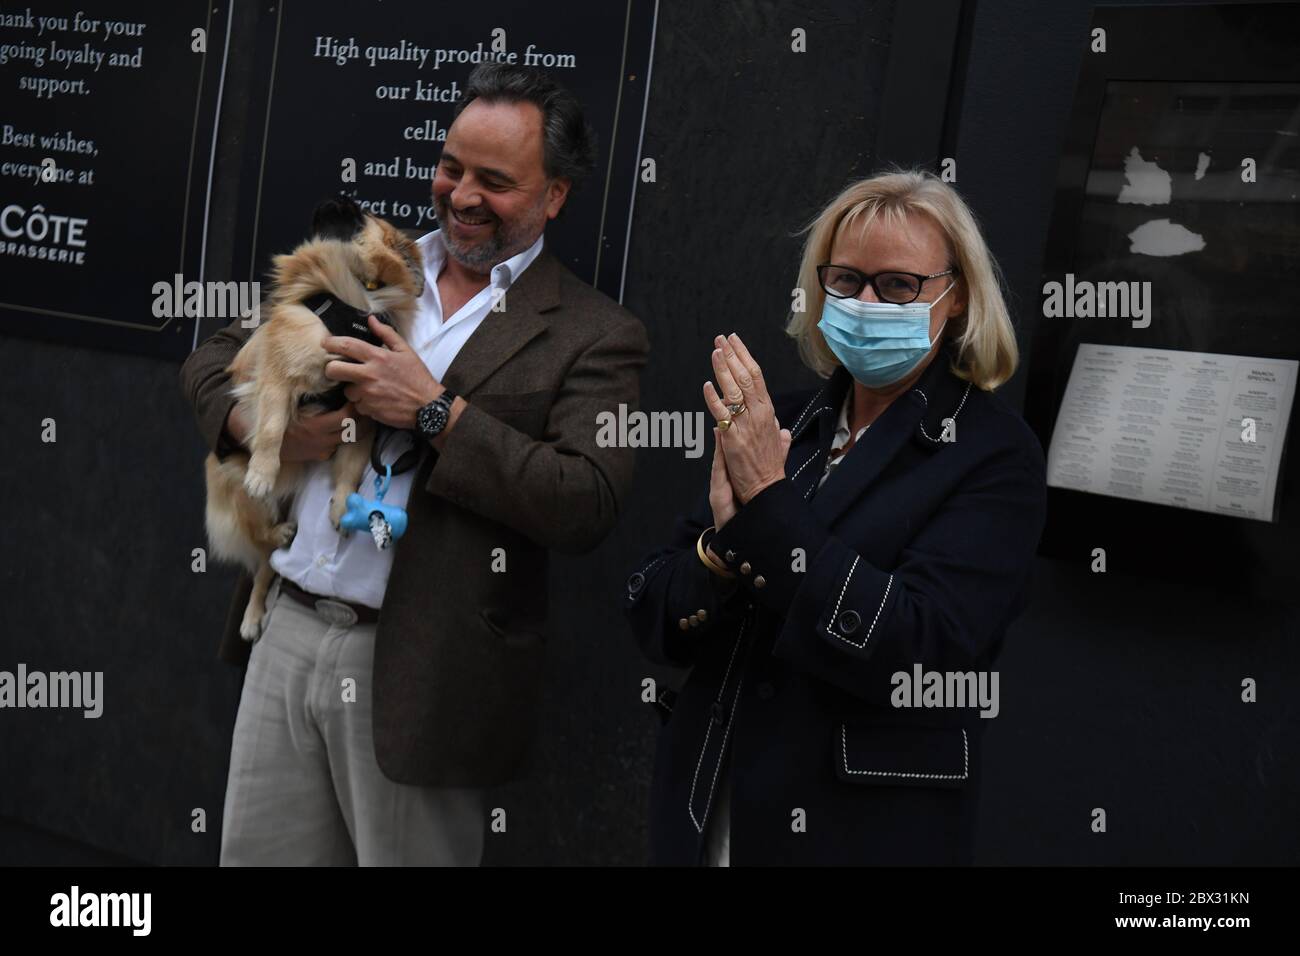 A couple outside the Chelsea and Westminster Hospital, London, join in applause during a Clap for Carers to recognise and support NHS workers and carers fighting the coronavirus pandemic. Stock Photo